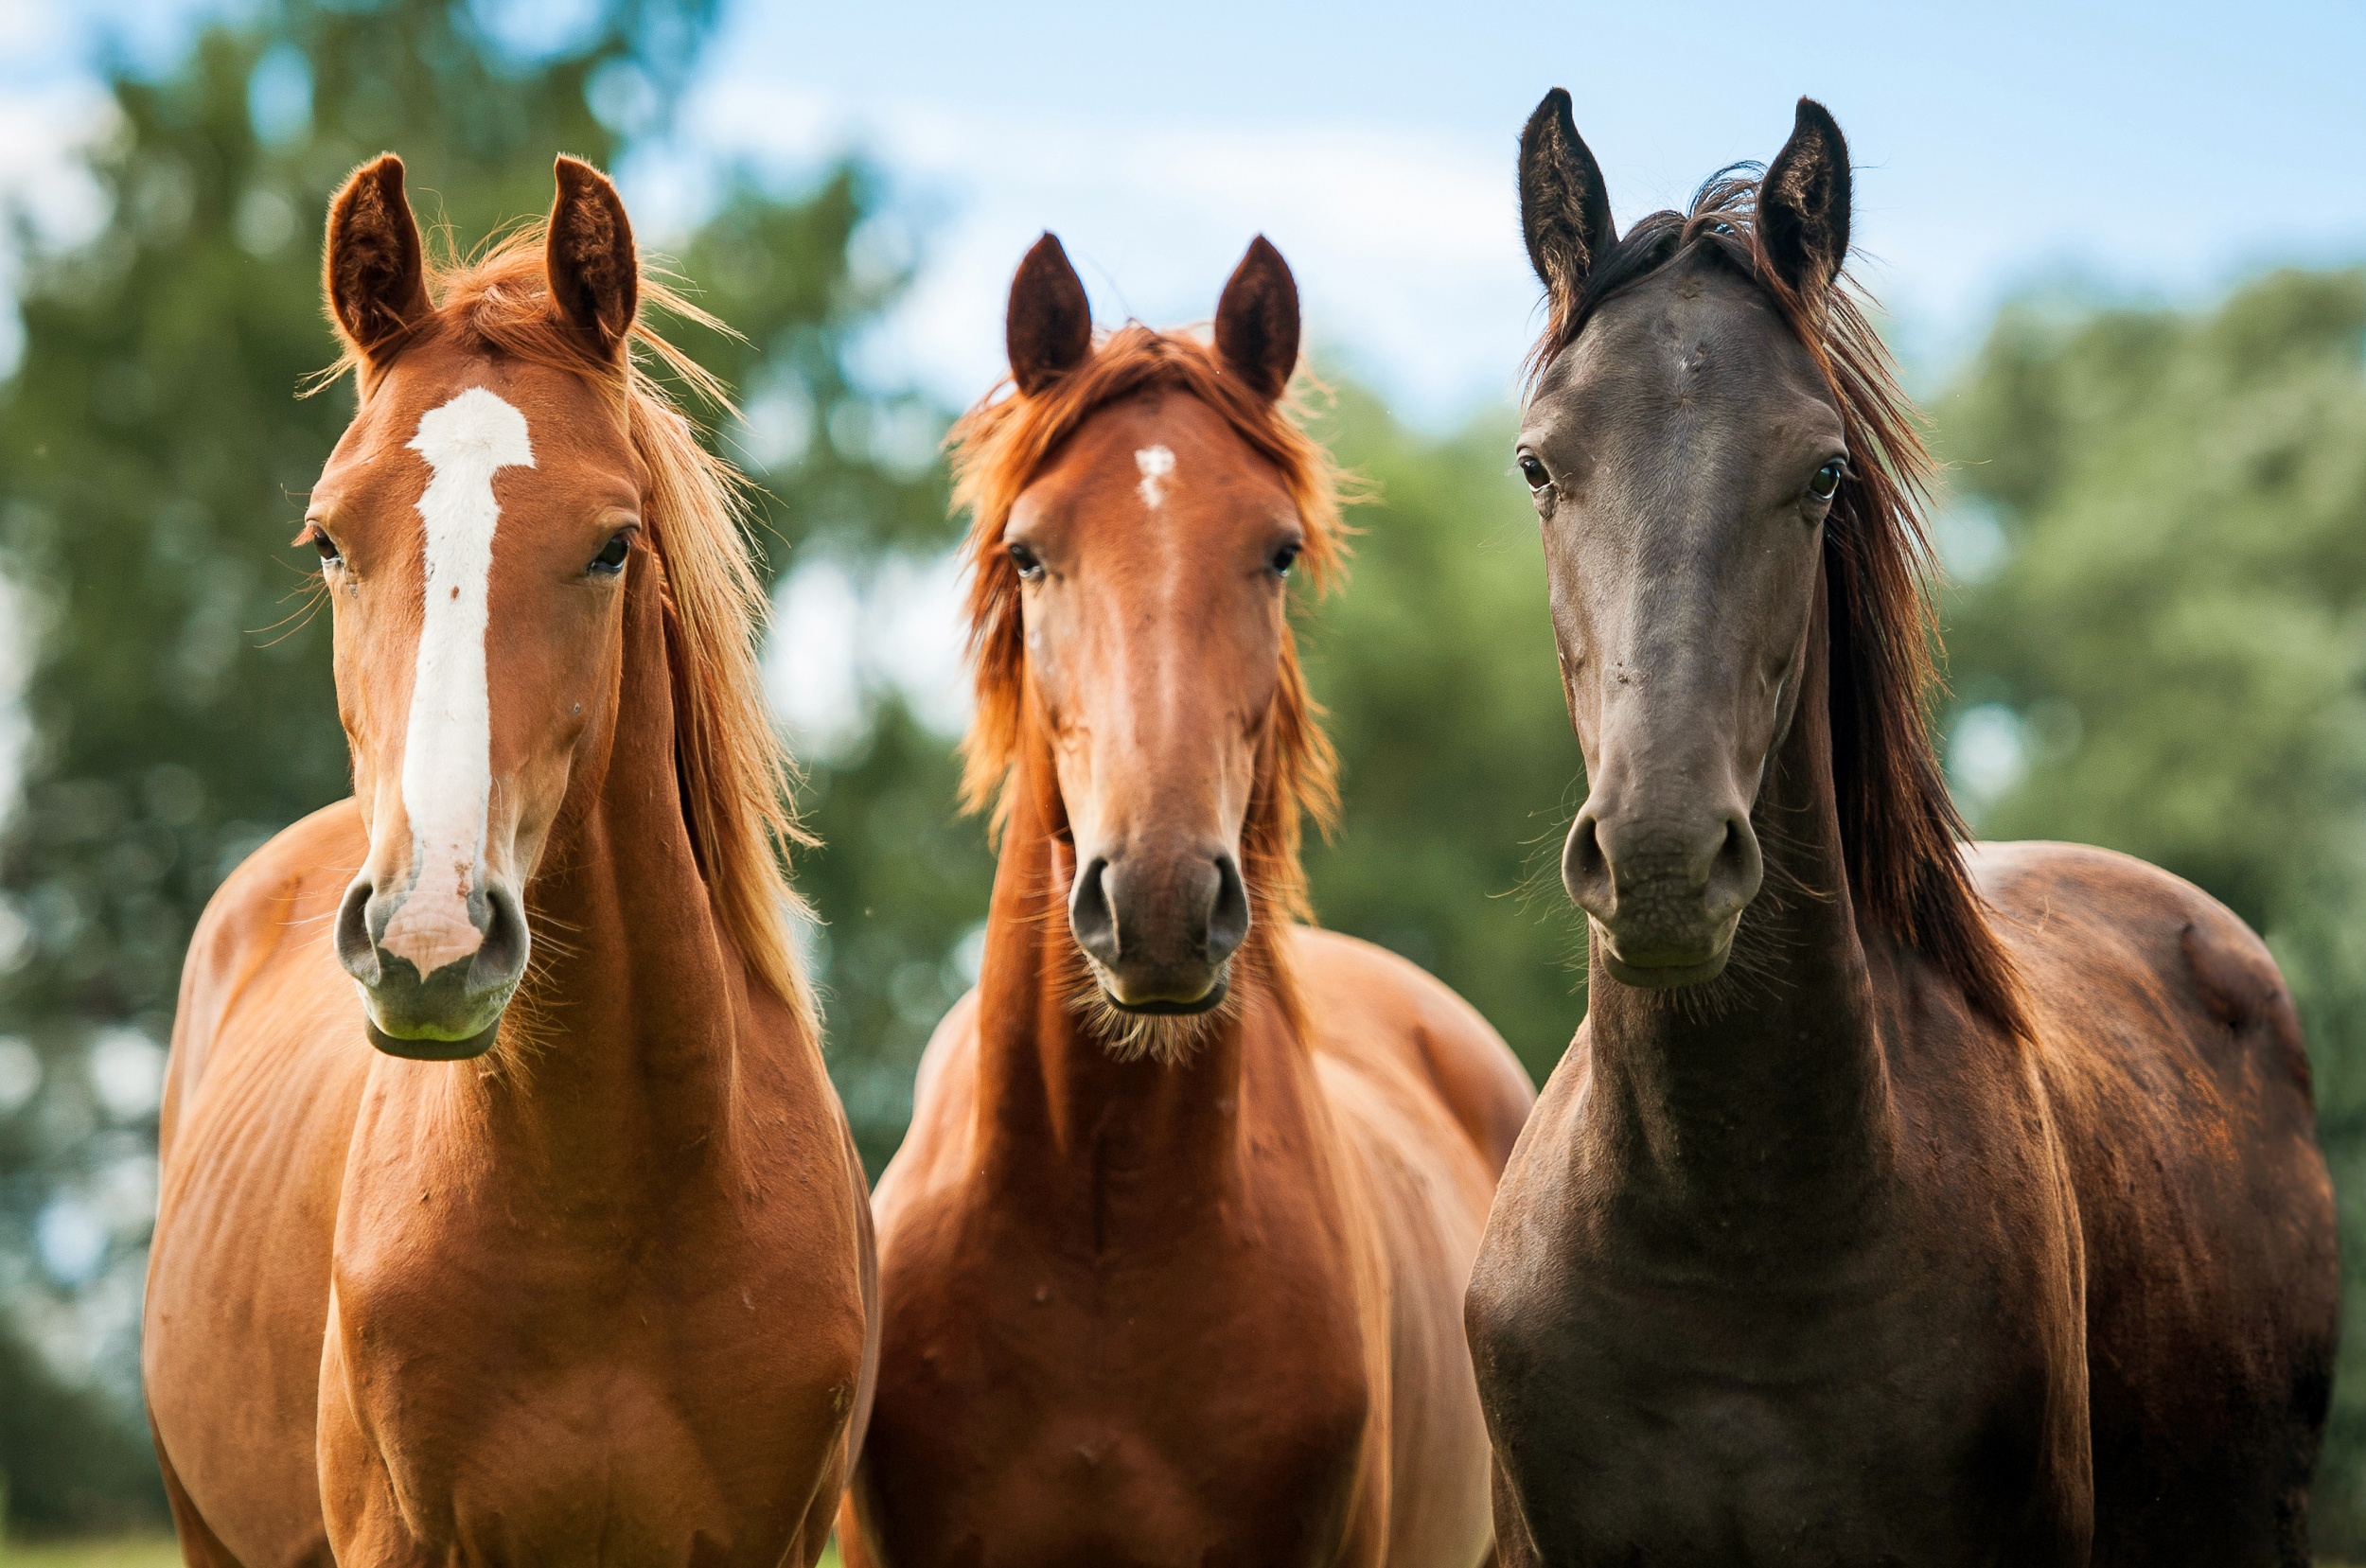 Three horses standing next to each other looking directly into the camera.